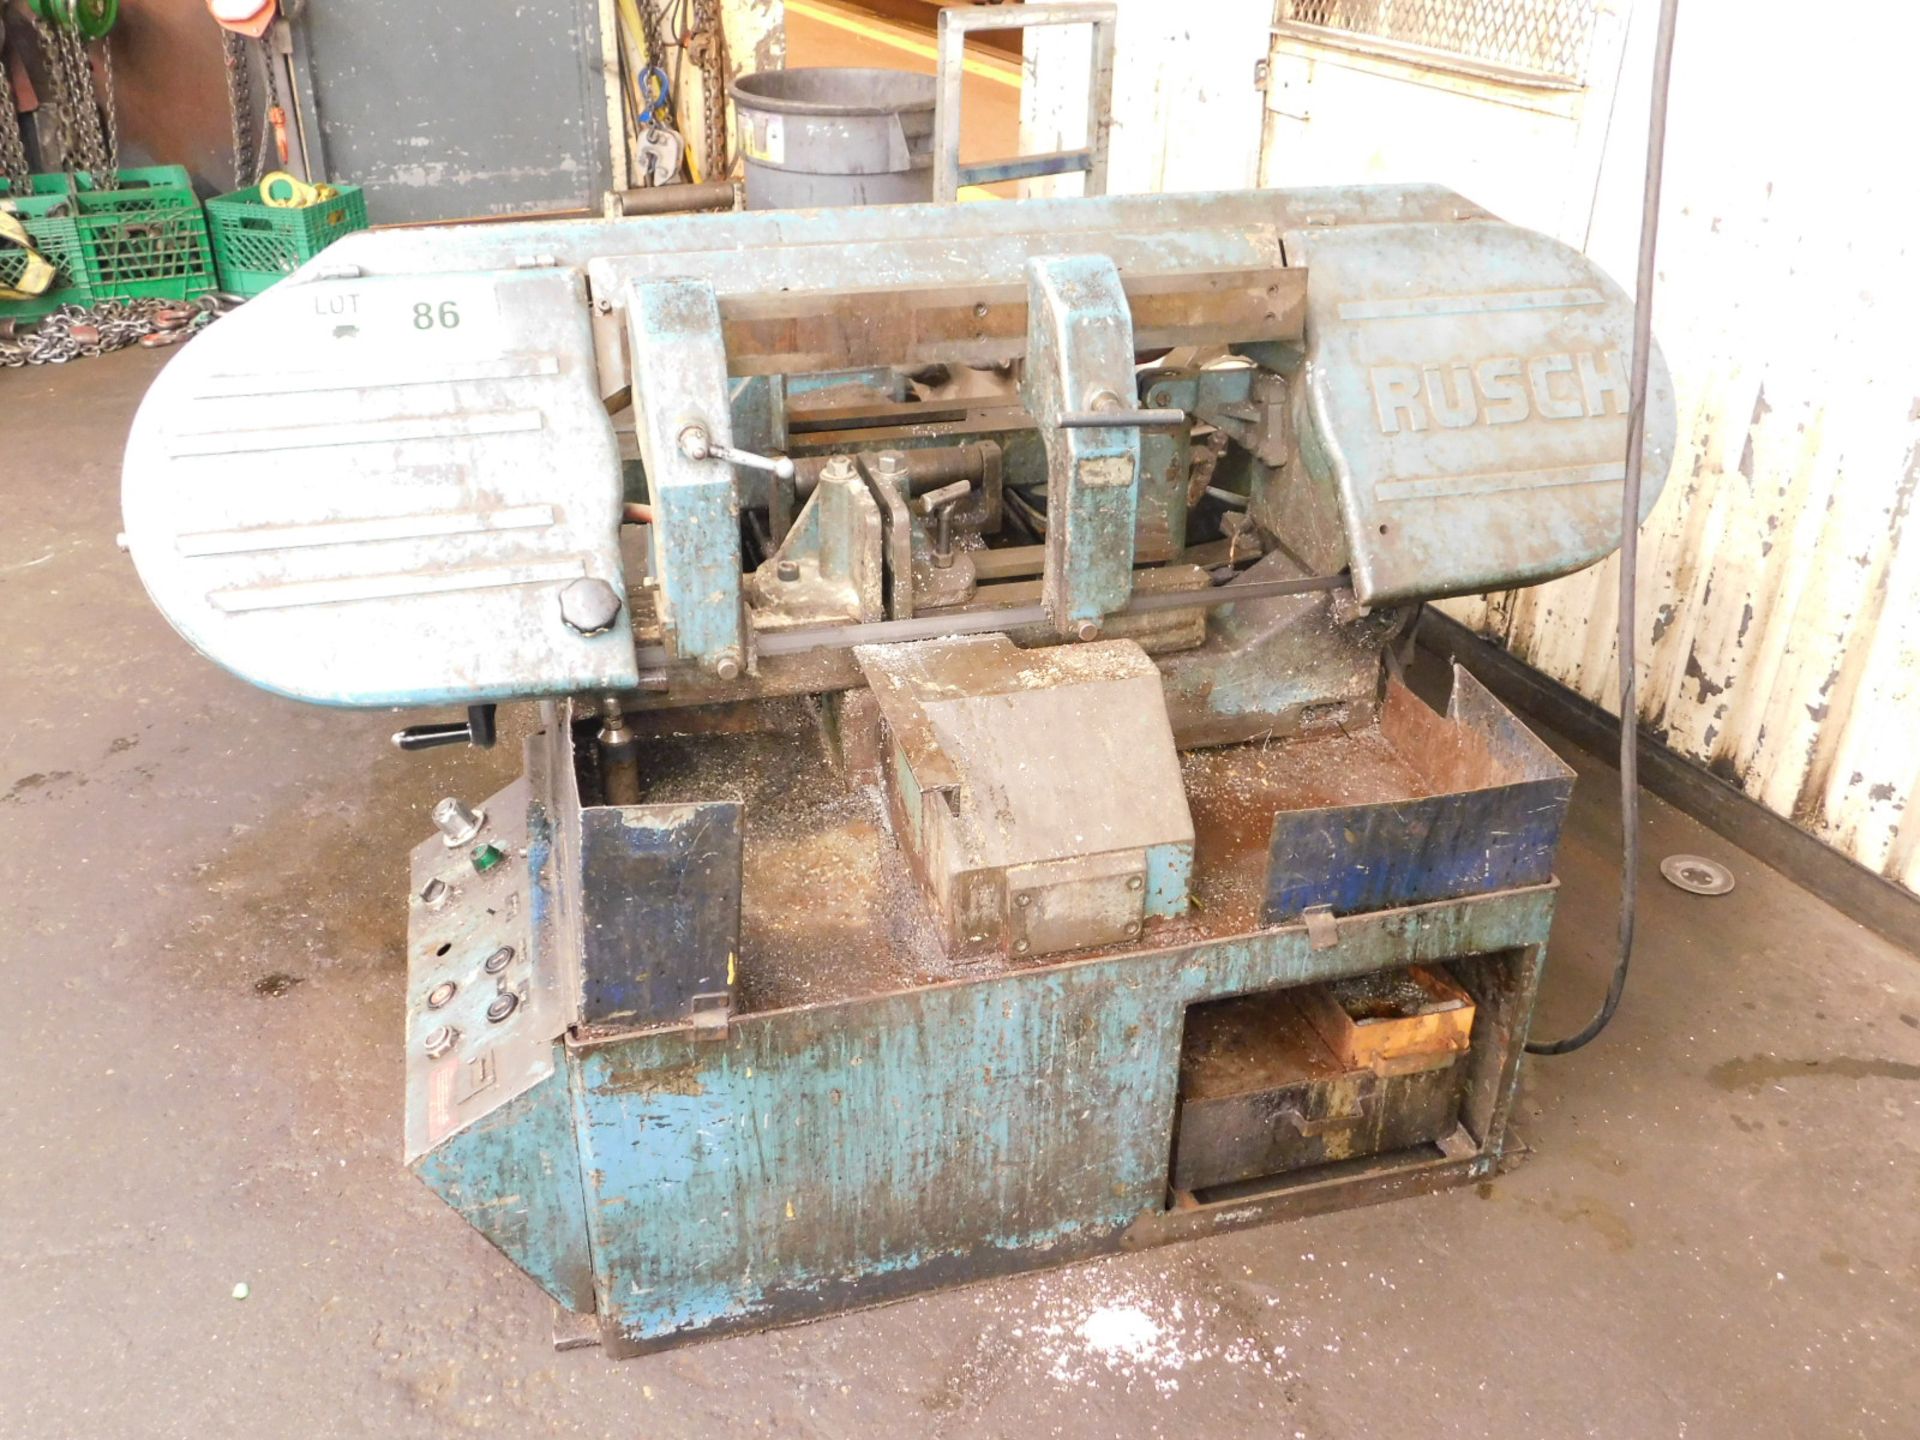 RUSCH #2 HORIZONTAL BANDSAW WITH 10" X 20" CUTTING CAPACITY, HYDRAULIC INFEED, COOLANT, S/N 45-